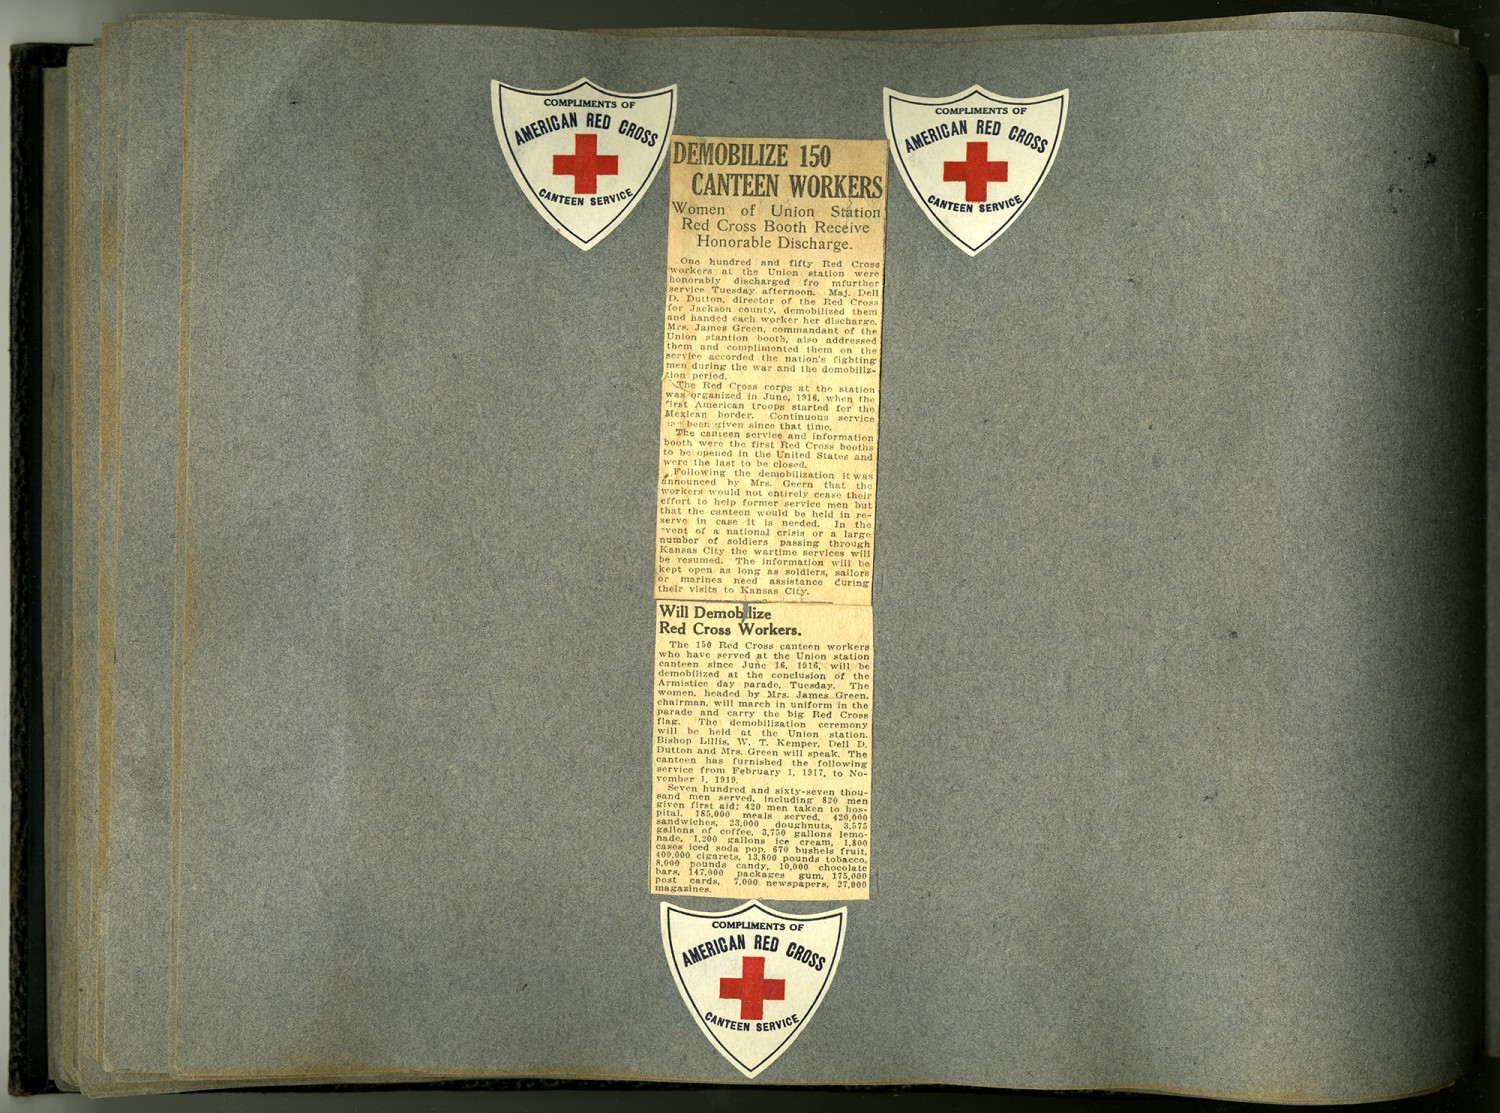 Tribute to the Red Cross Nursing Pin